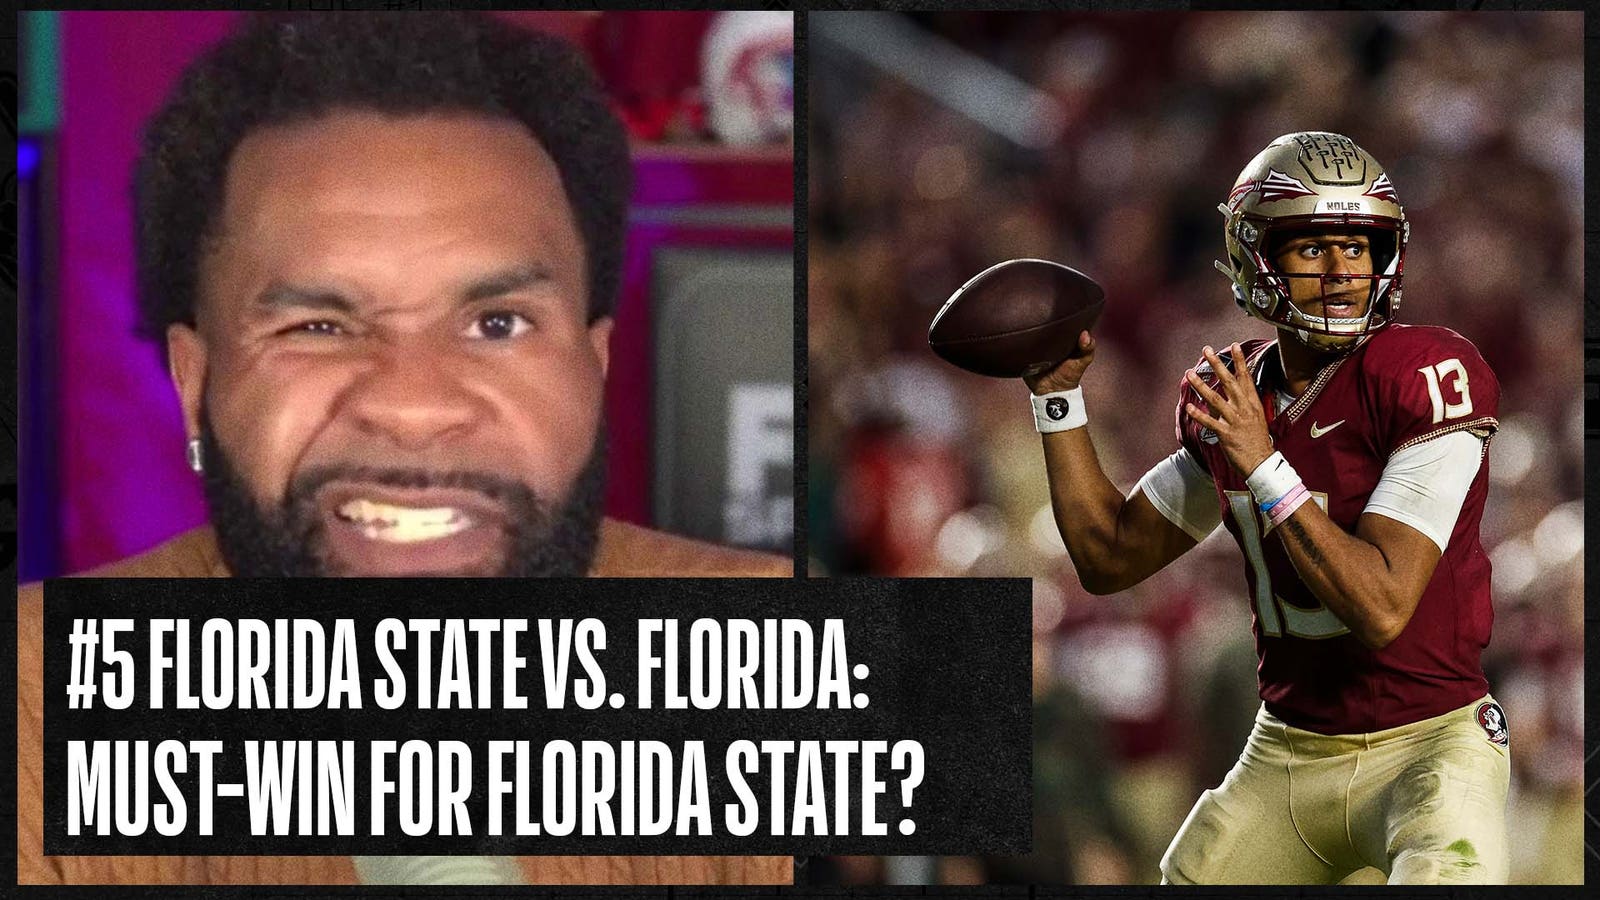 Florida State takes on Florida in rivalry game with extra importance